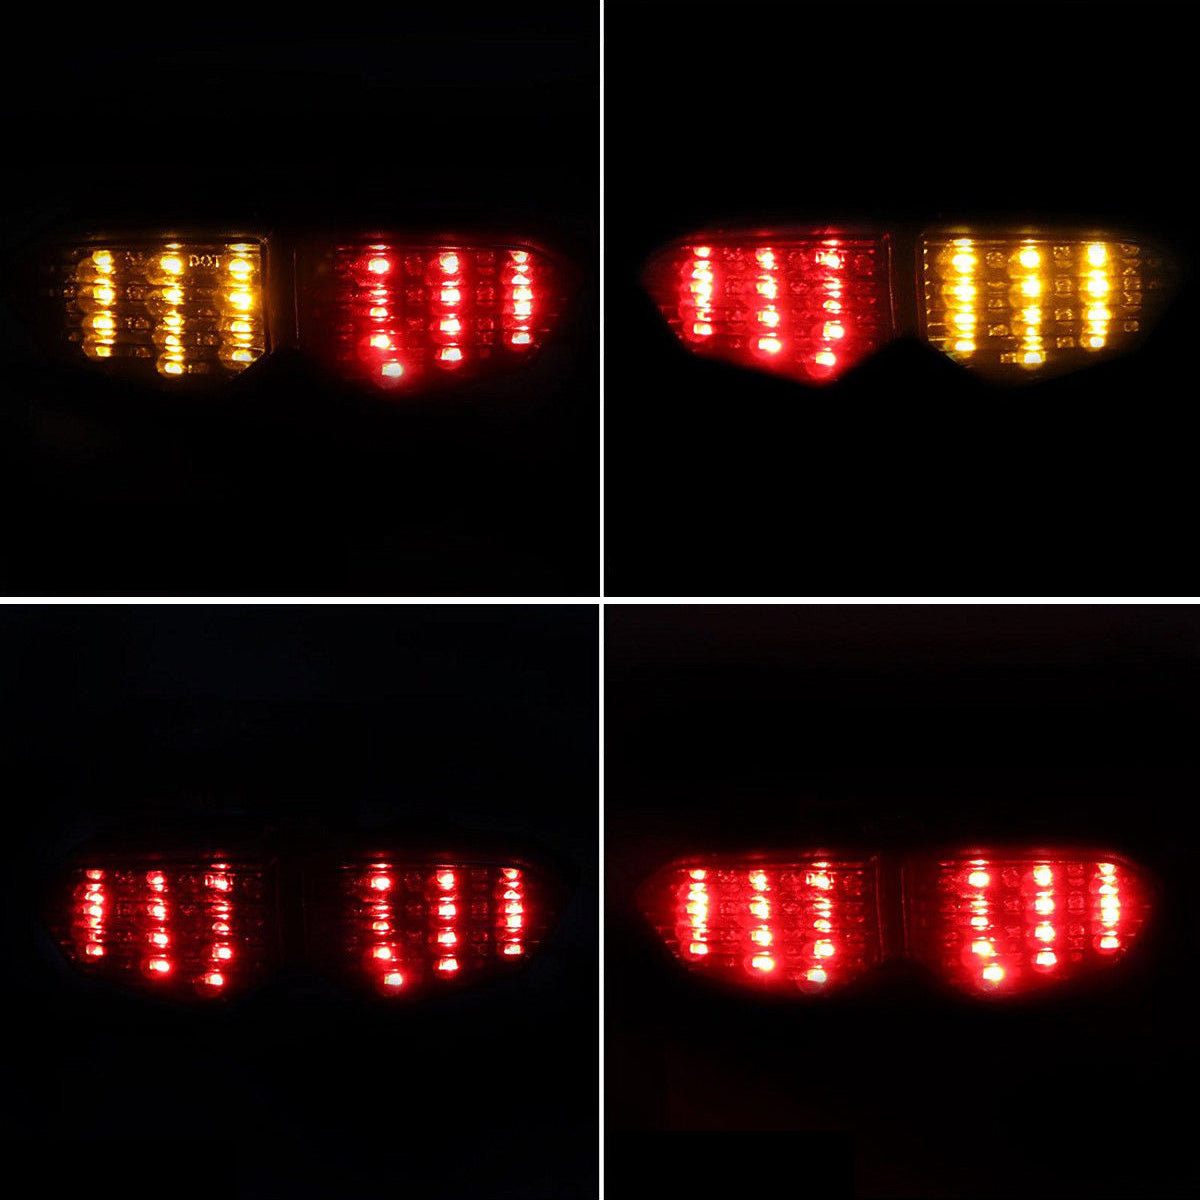 Integrated LED TailLight Turn Signals for Yamaha YZF R6 03-05 YZF R6S Smoke